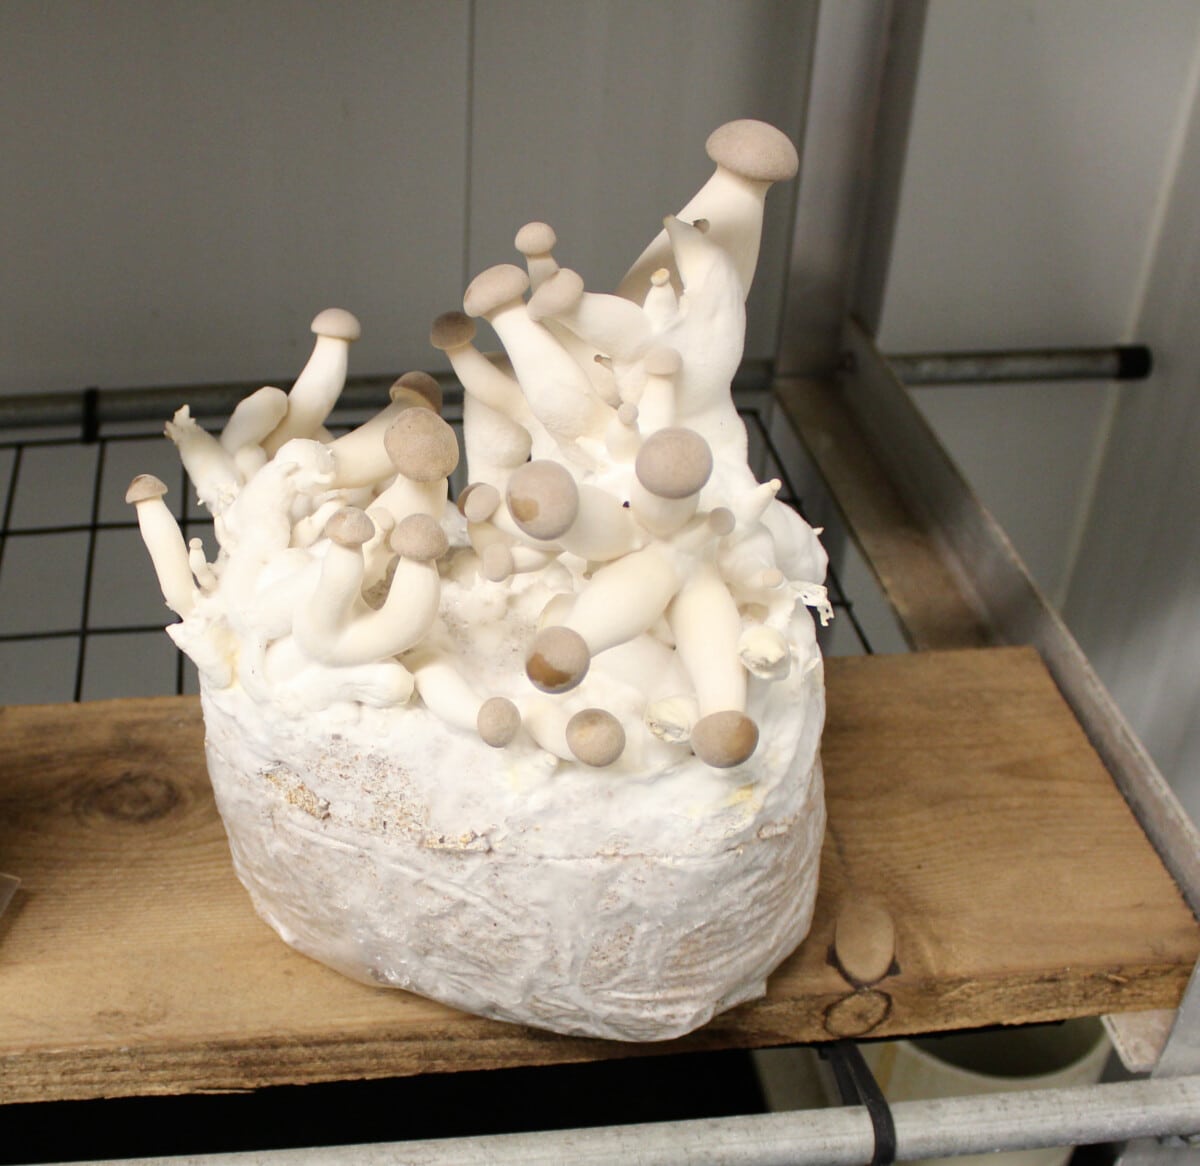 King oyster mushrooms are one of my top three types to buy when I visit Phillips.